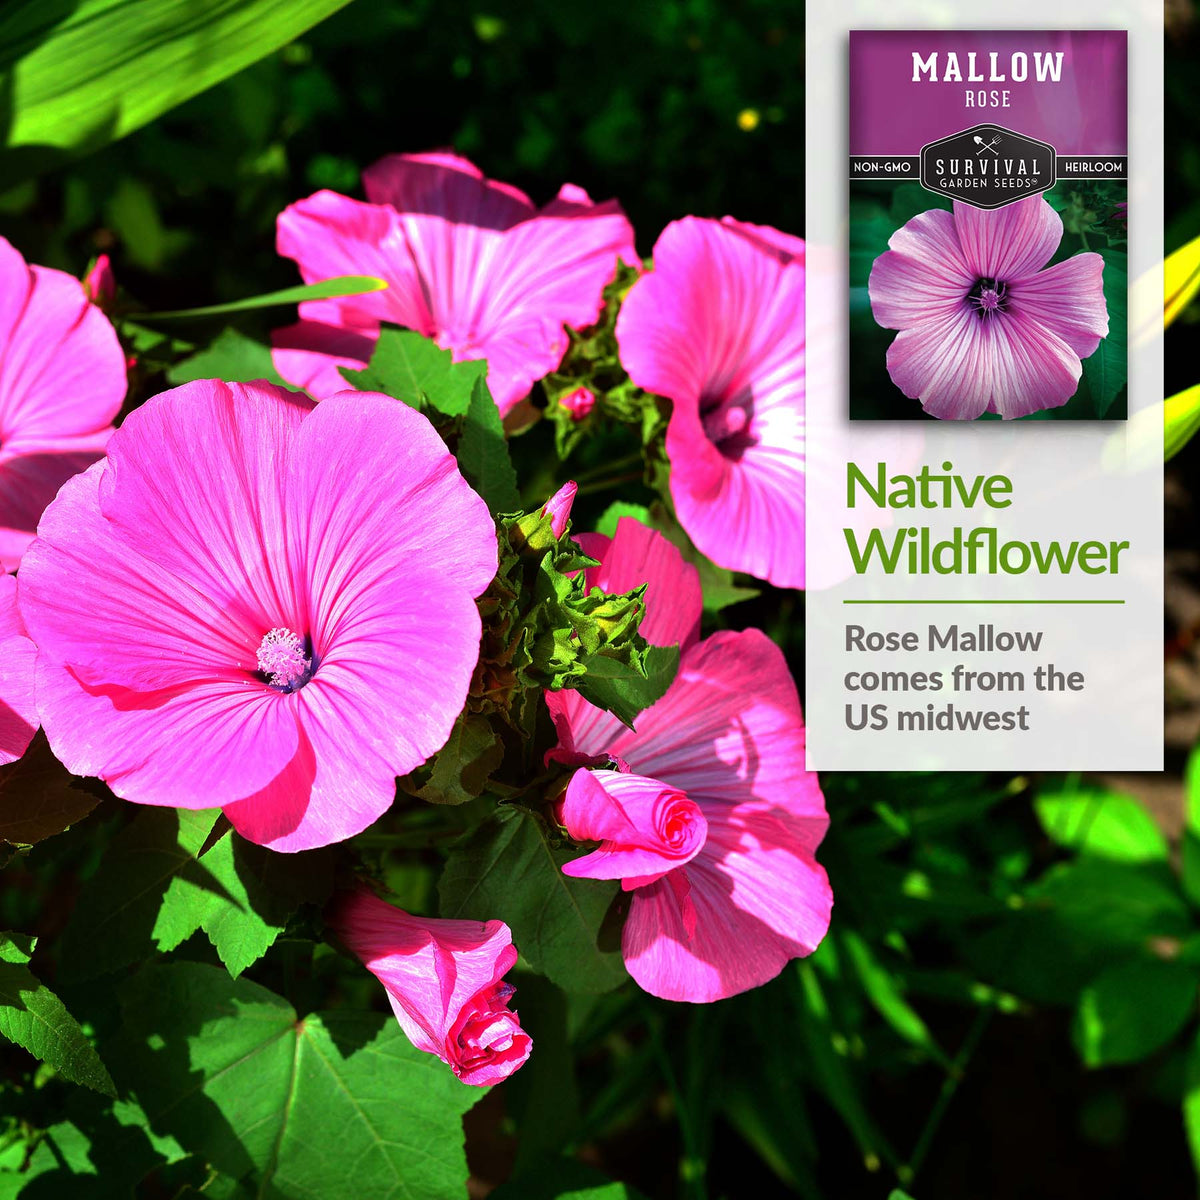 Rose Mallow is a native wildflower